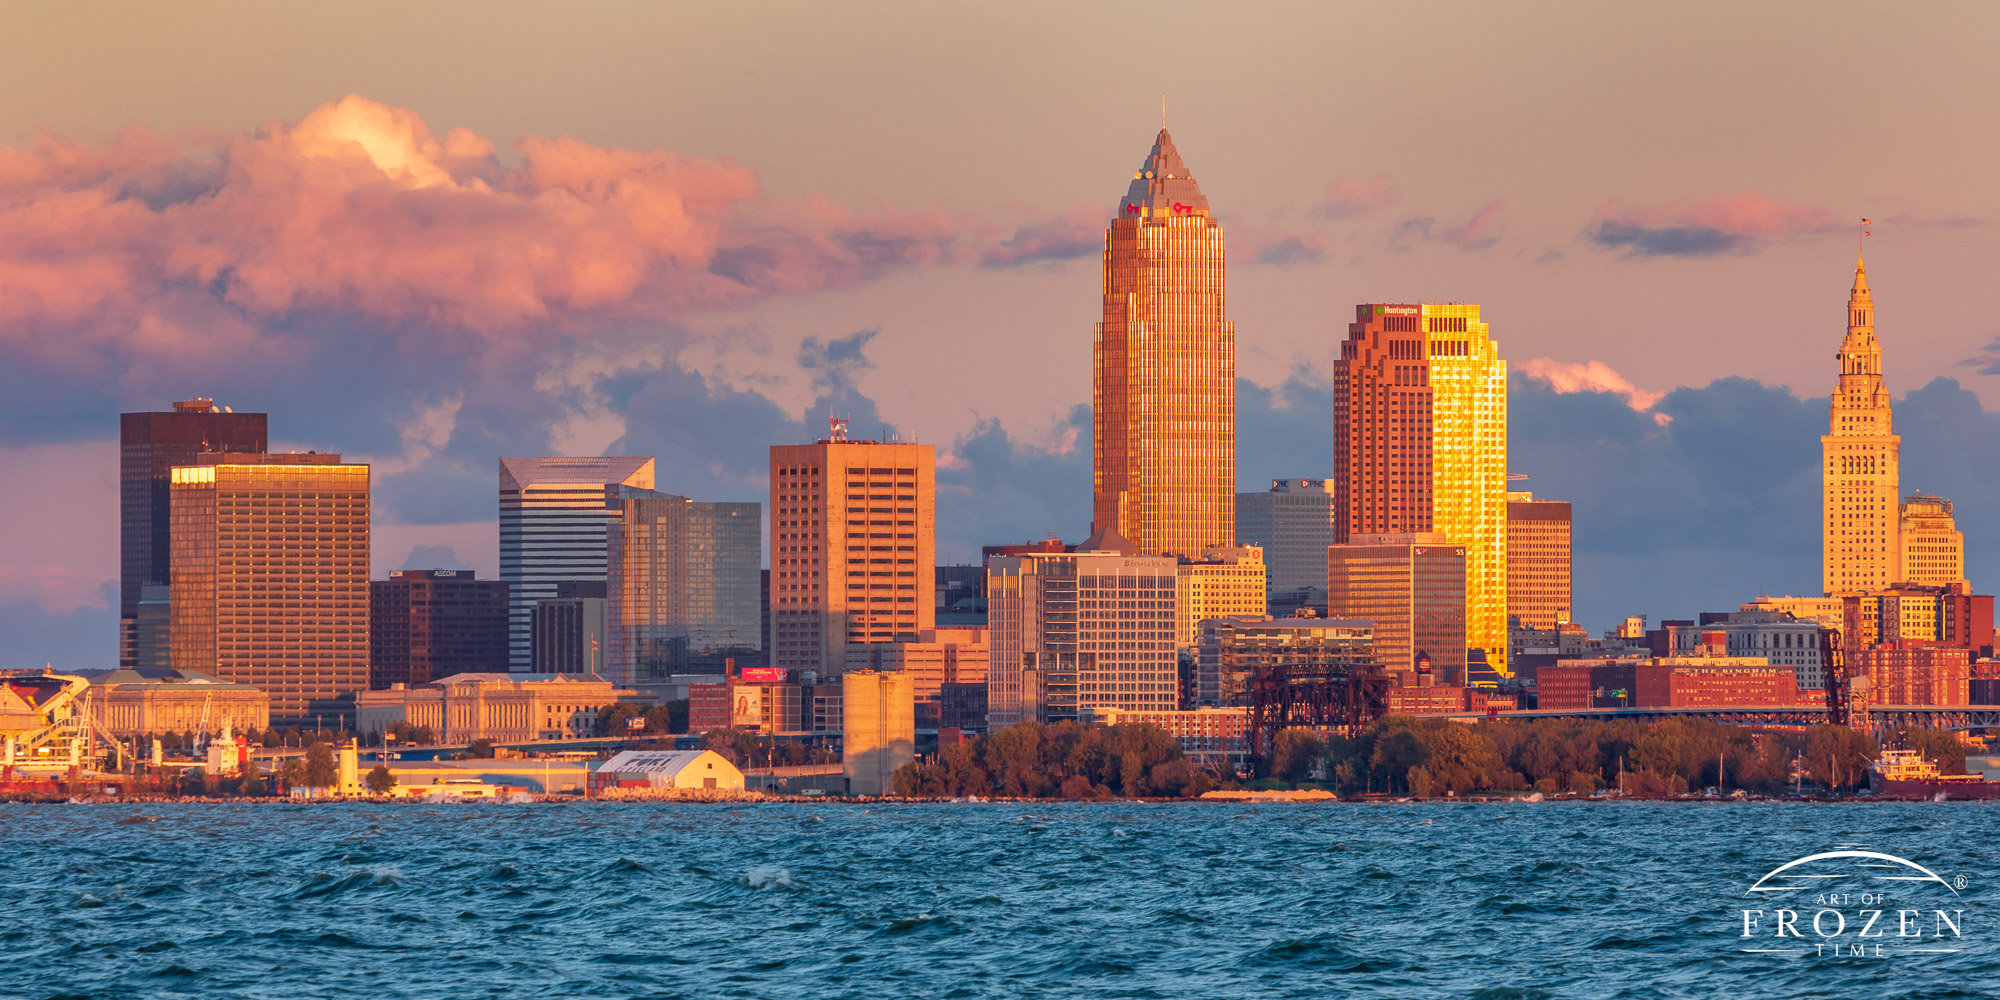 Strong winds over Lake Erie rush ashore over Cleveland, Ohio, as the setting sun paints the skyline in warm light